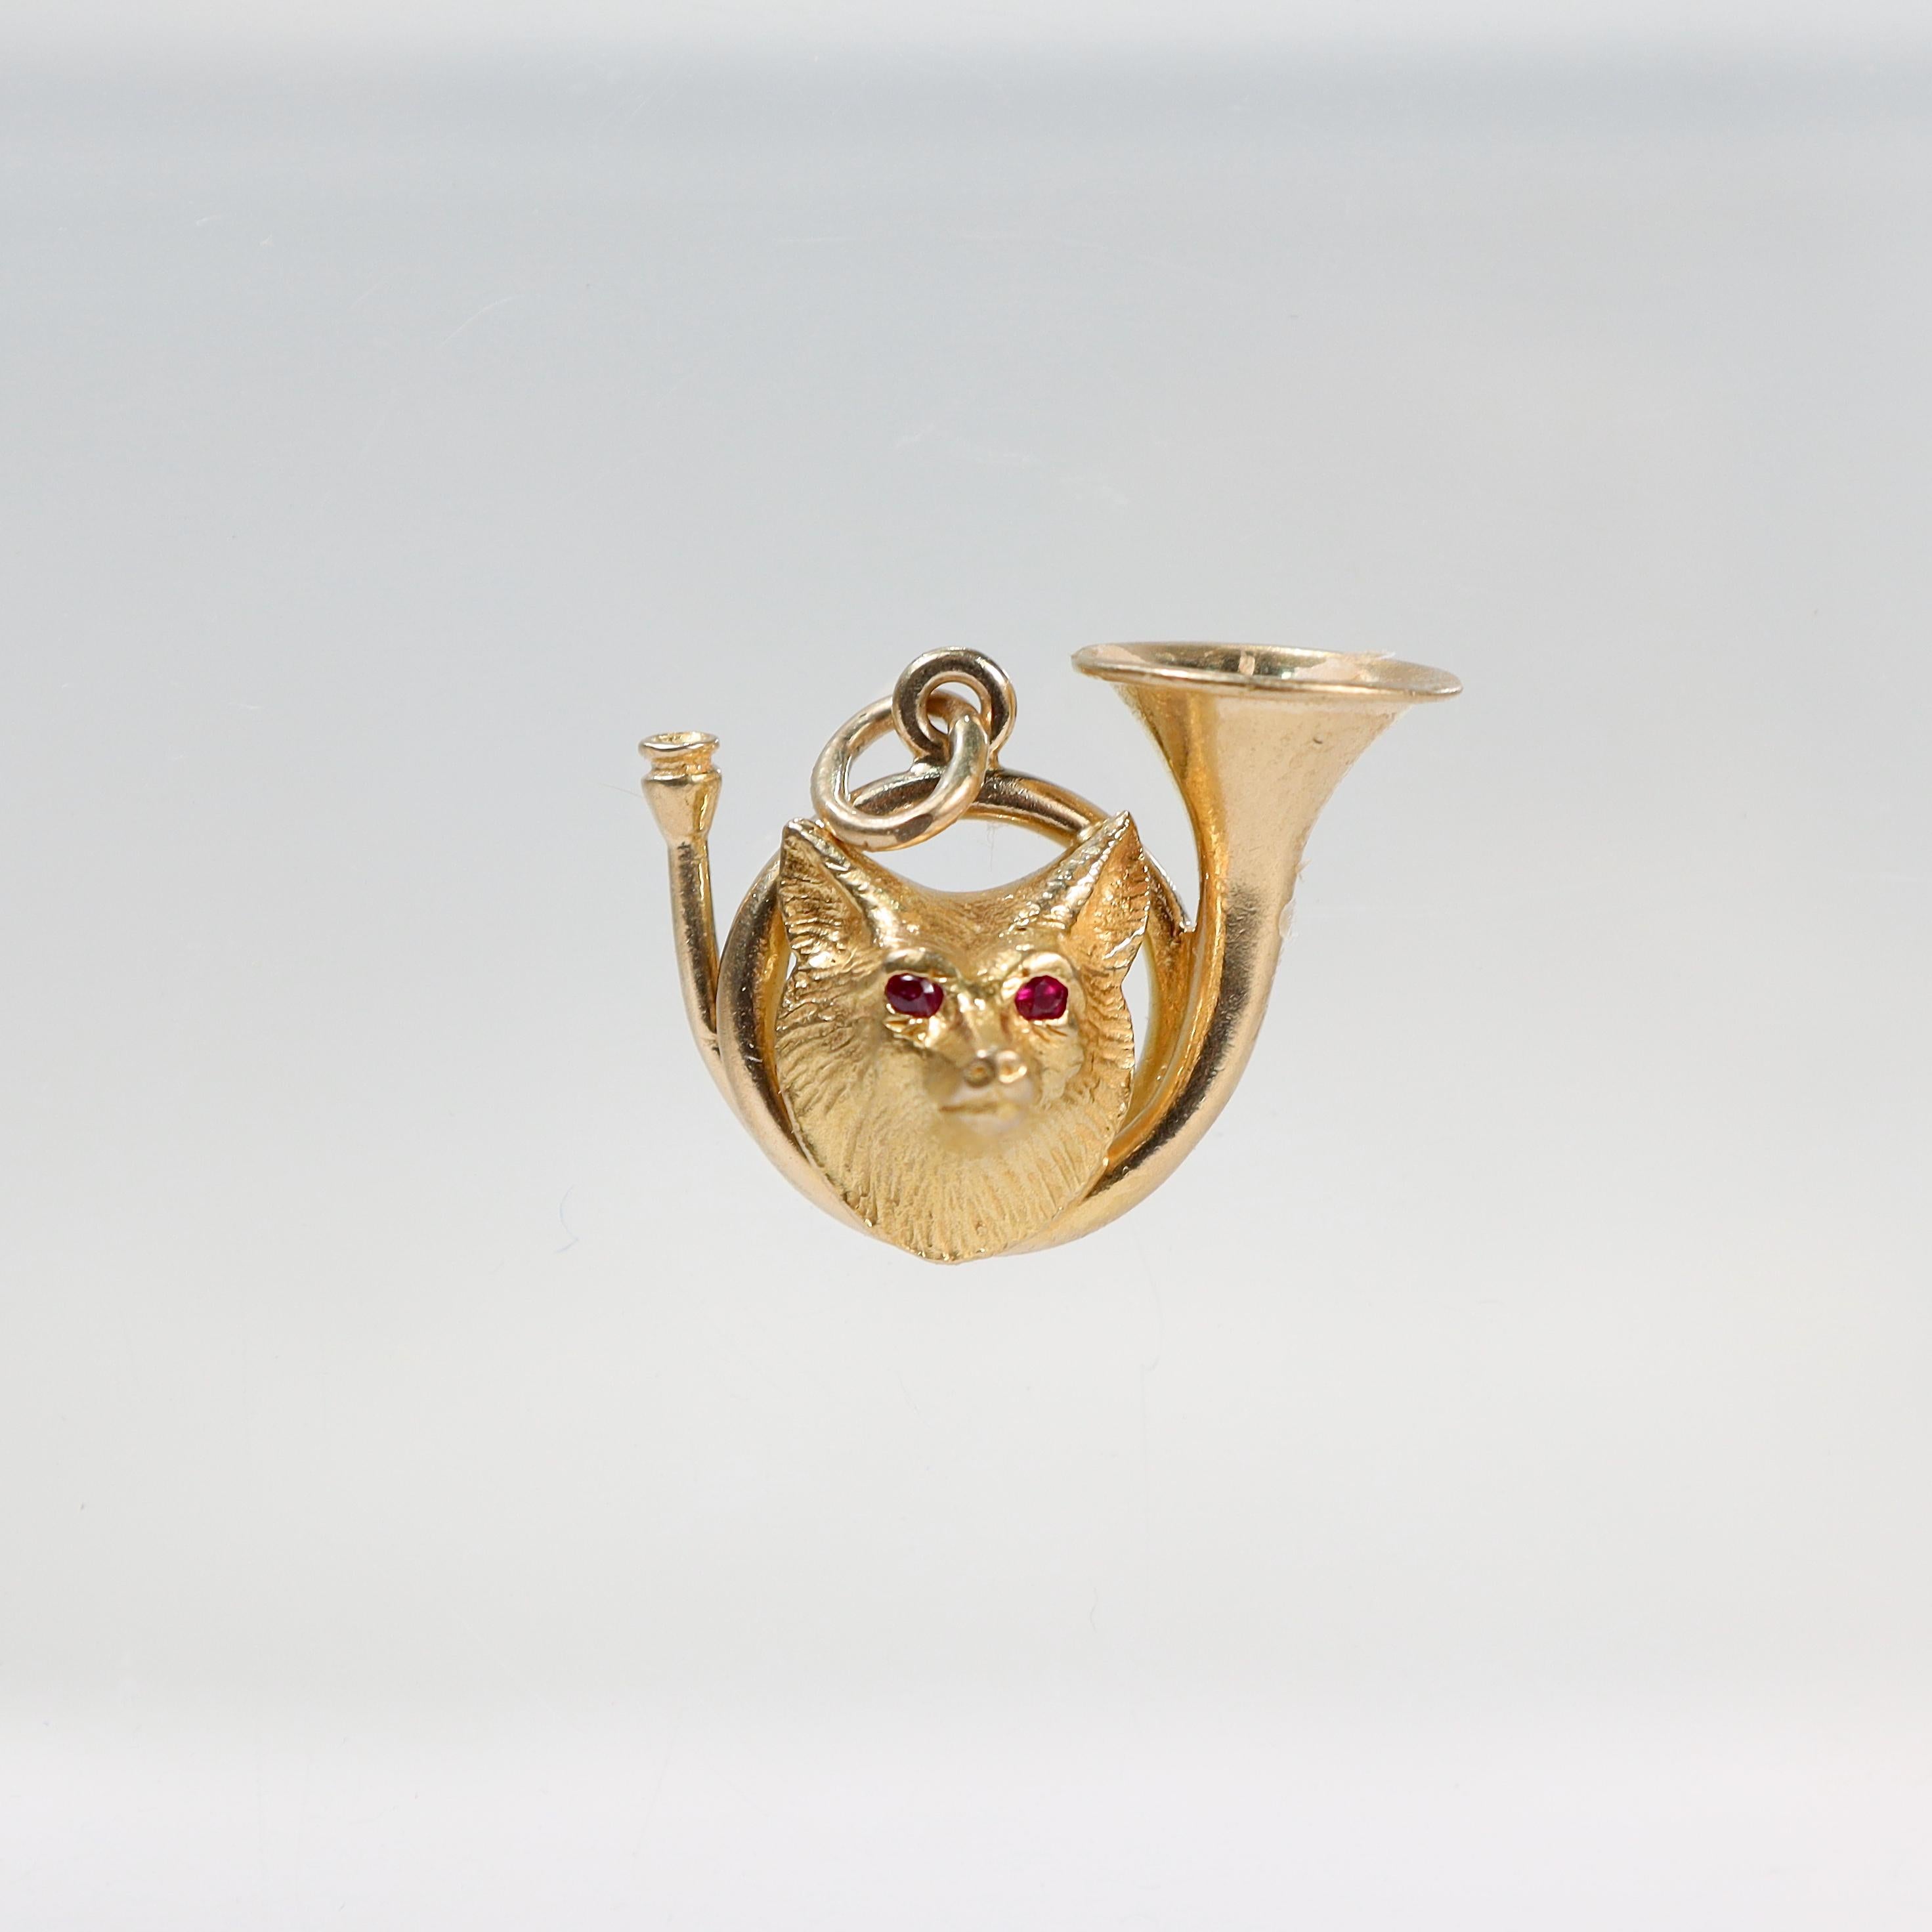 A very fine signed Edwardian fox hunt charm.

In 14 karat yellow gold. 

By Whiteside & Blank.

Comprised of a fox head mounted on gold trumpet that is with flush-set tiny round ruby eyes.

With an attached bale to easily add chain or attach to a